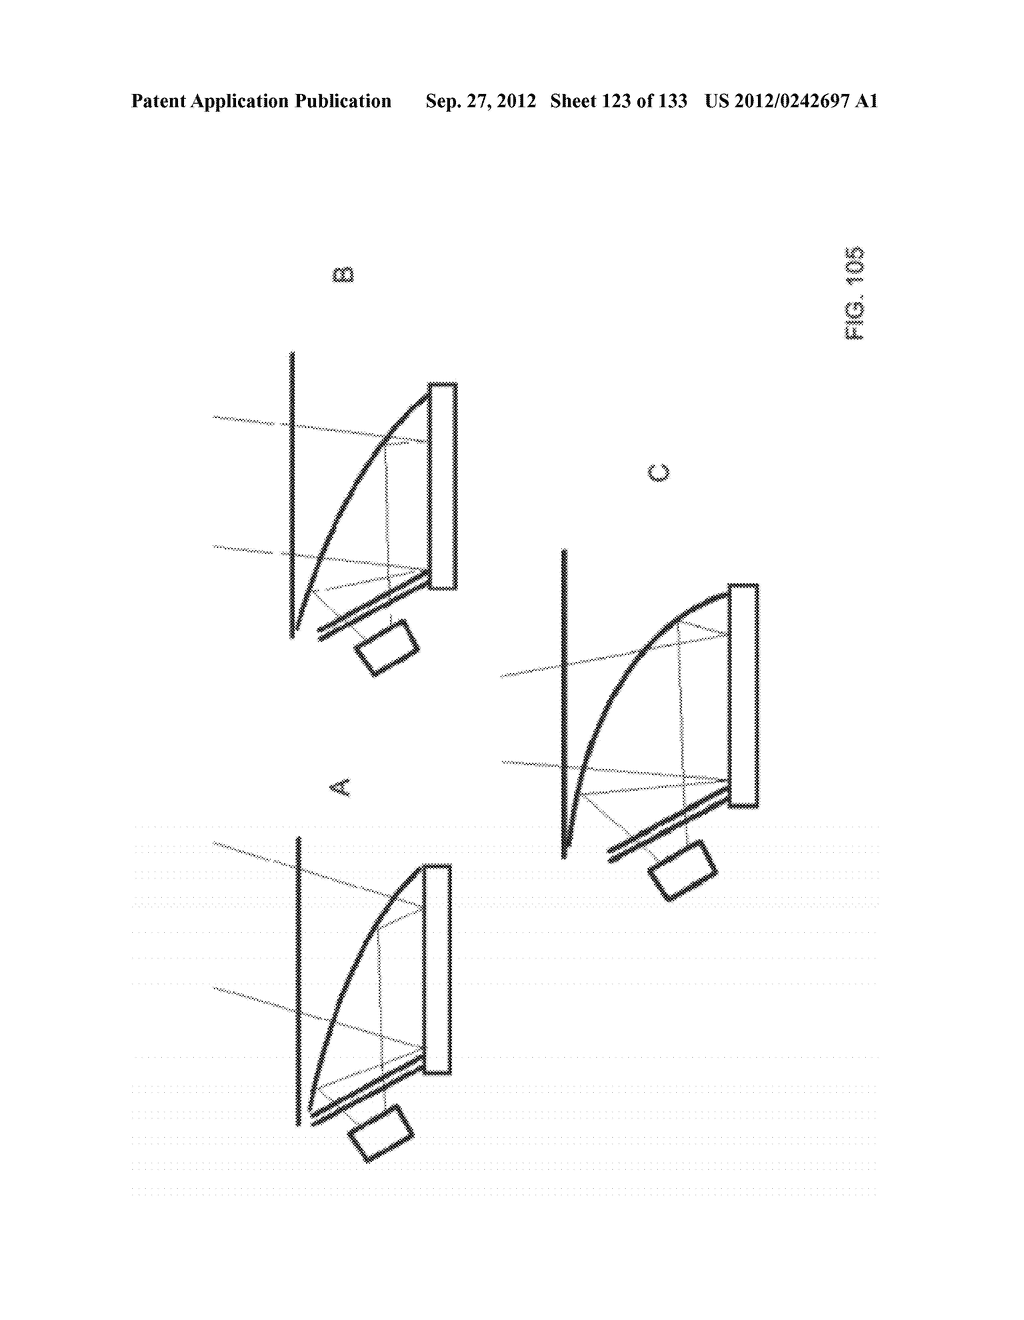 SEE-THROUGH NEAR-EYE DISPLAY GLASSES WITH THE OPTICAL ASSEMBLY INCLUDING     ABSORPTIVE POLARIZERS OR ANTI-REFLECTIVE COATINGS TO REDUCE STRAY LIGHT - diagram, schematic, and image 124